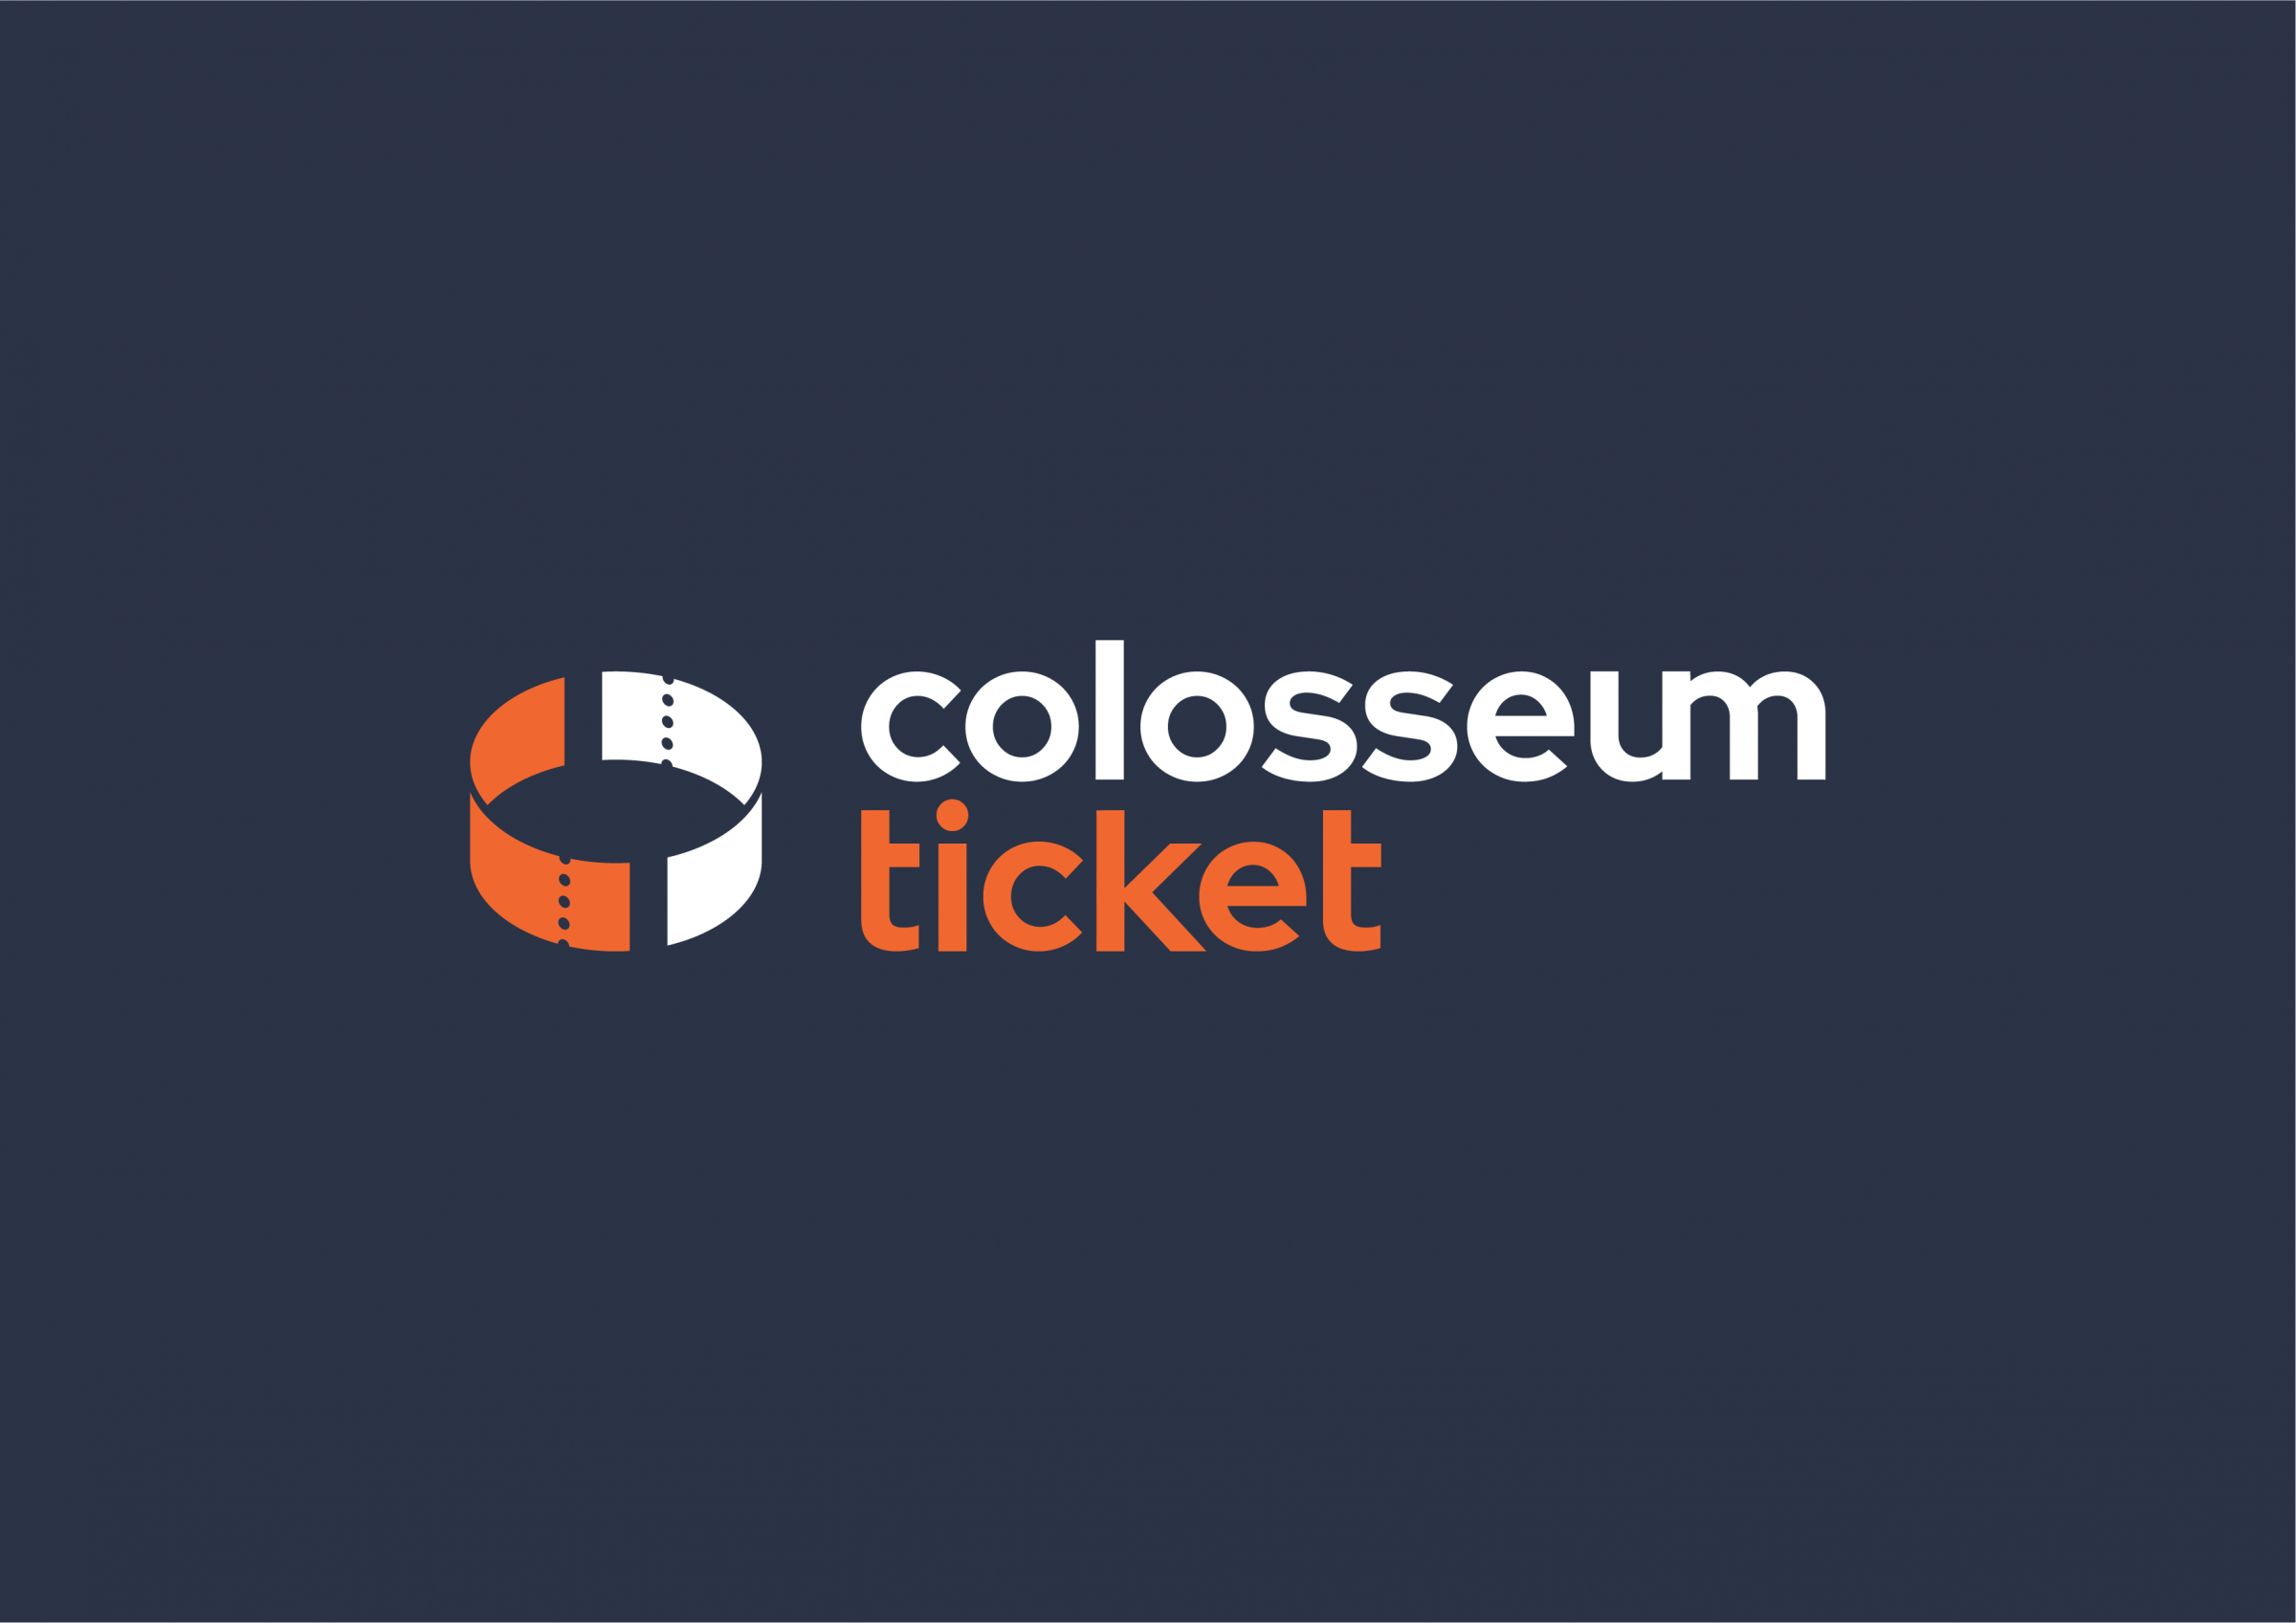 Colosseum_ticket_Logo_horizontal_color_on_dark.png